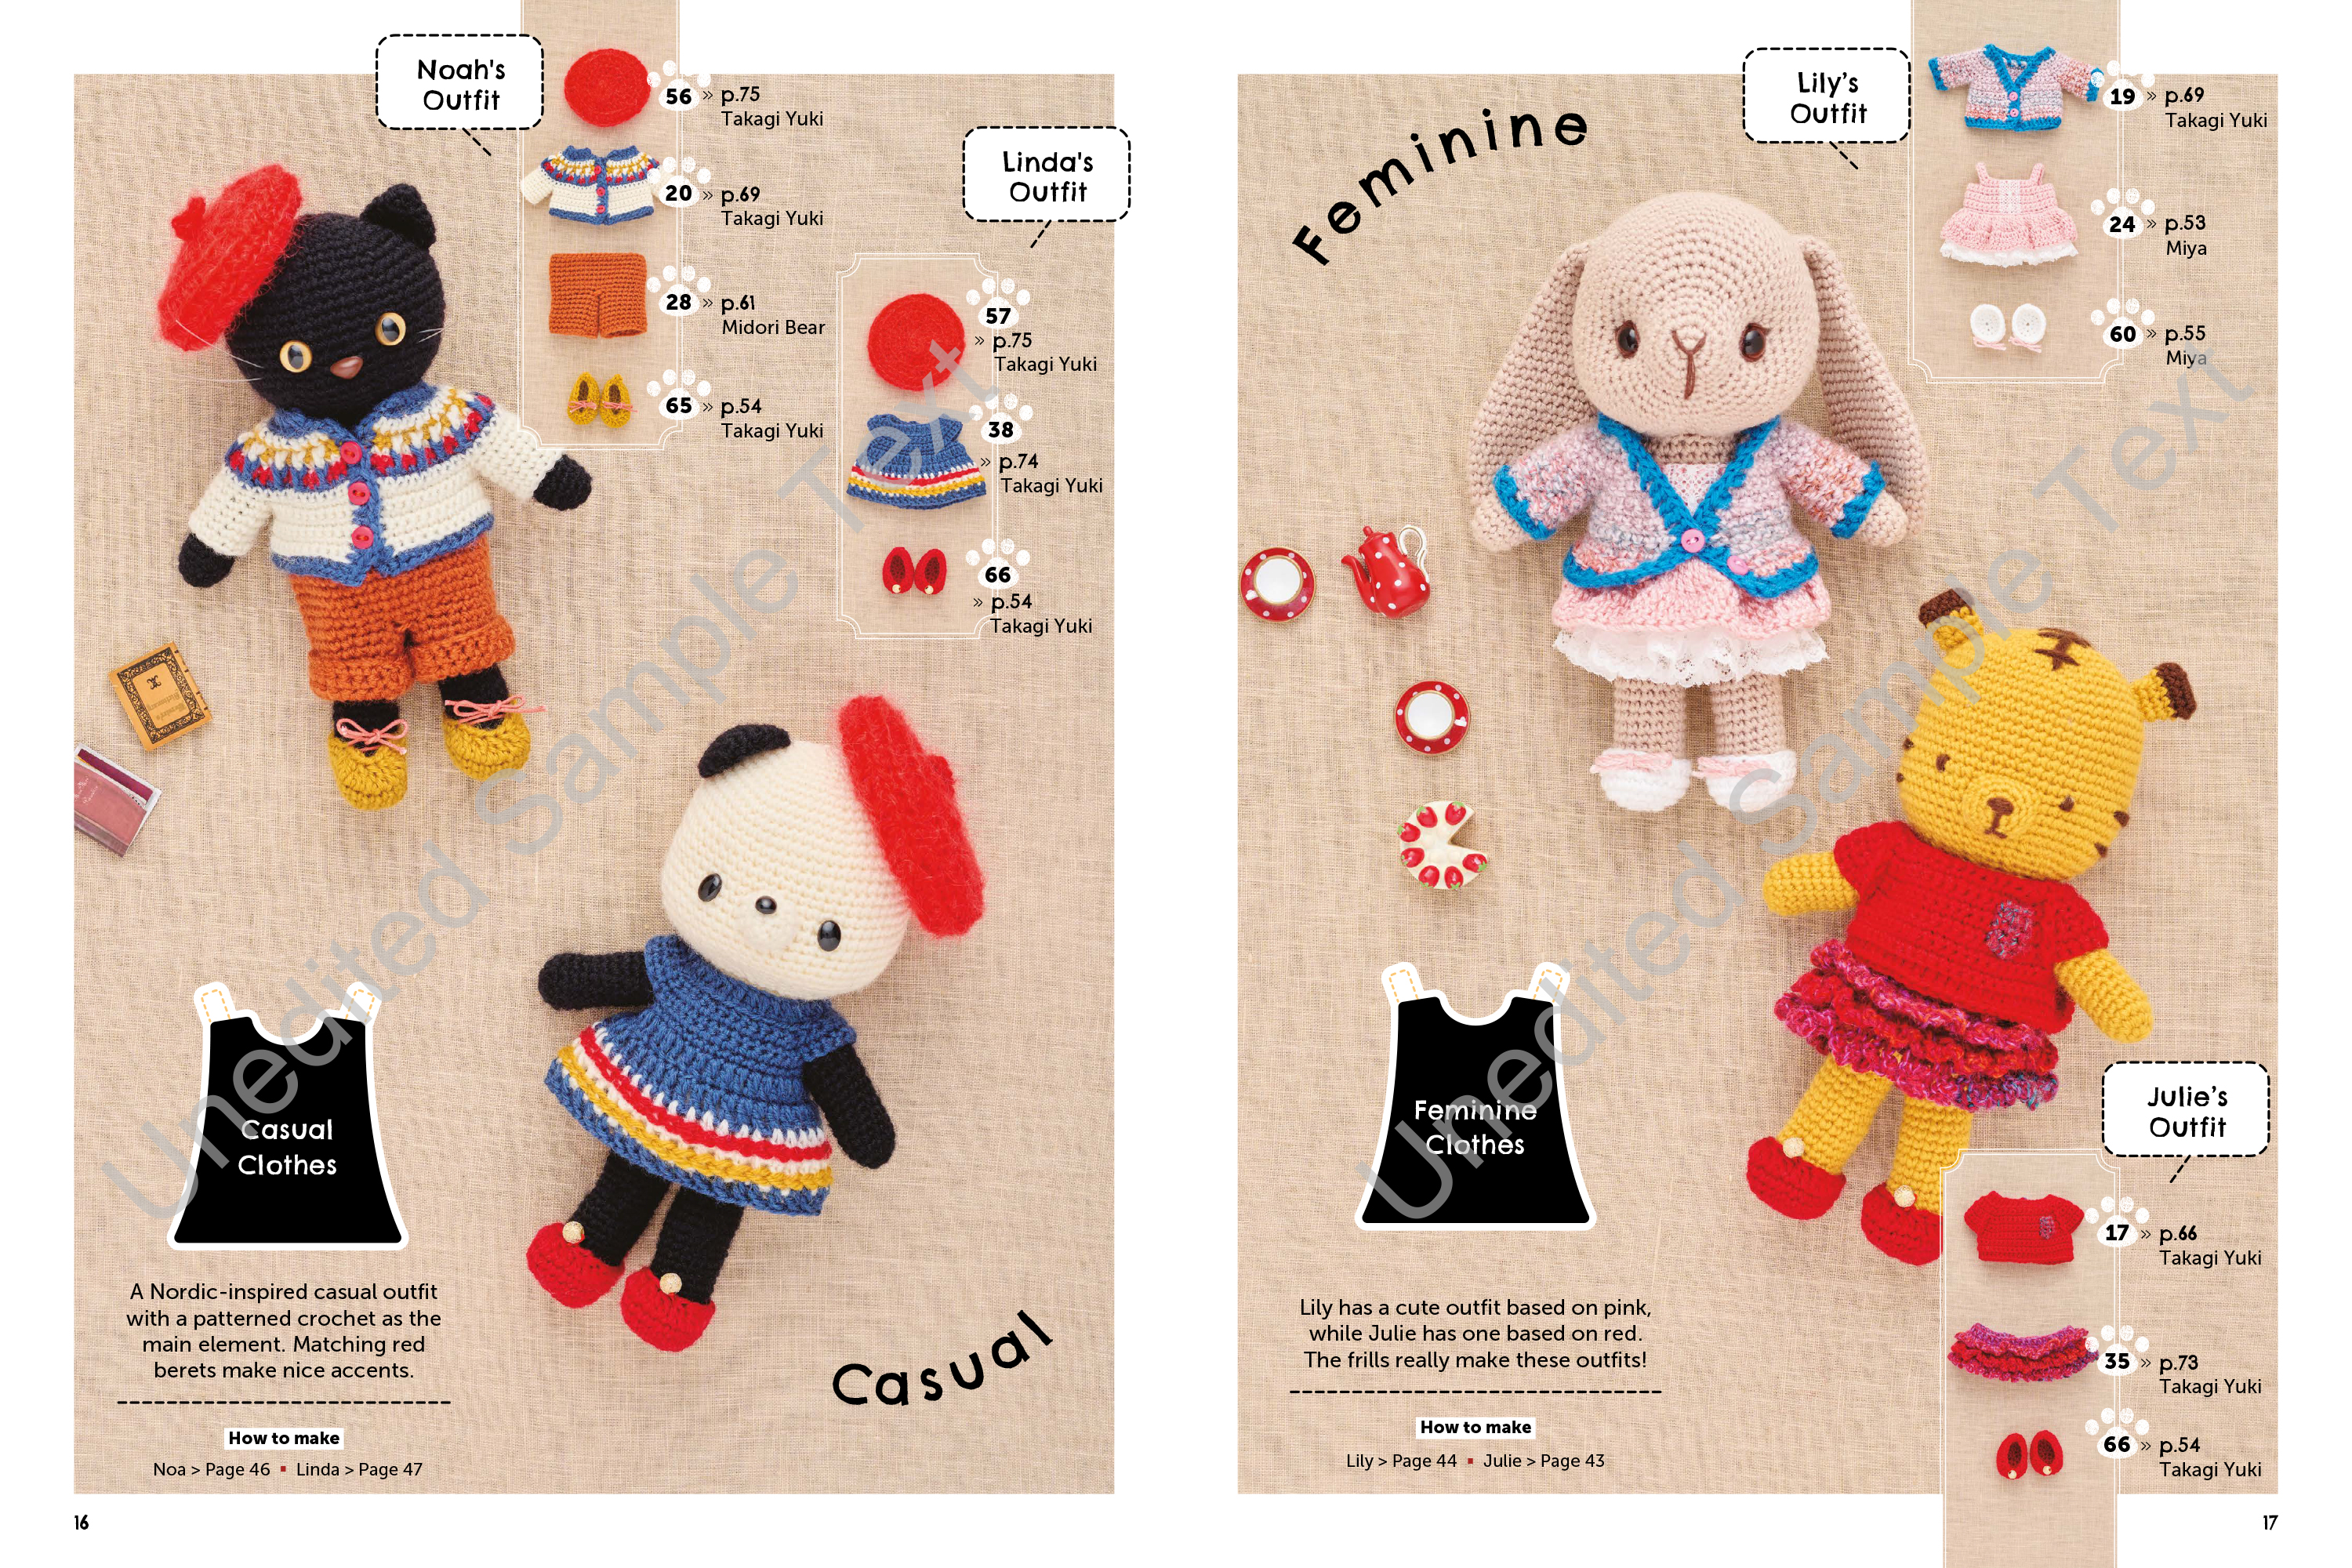 Crochet Cute Amigurumi Animals with Mix-and-Match Outfits